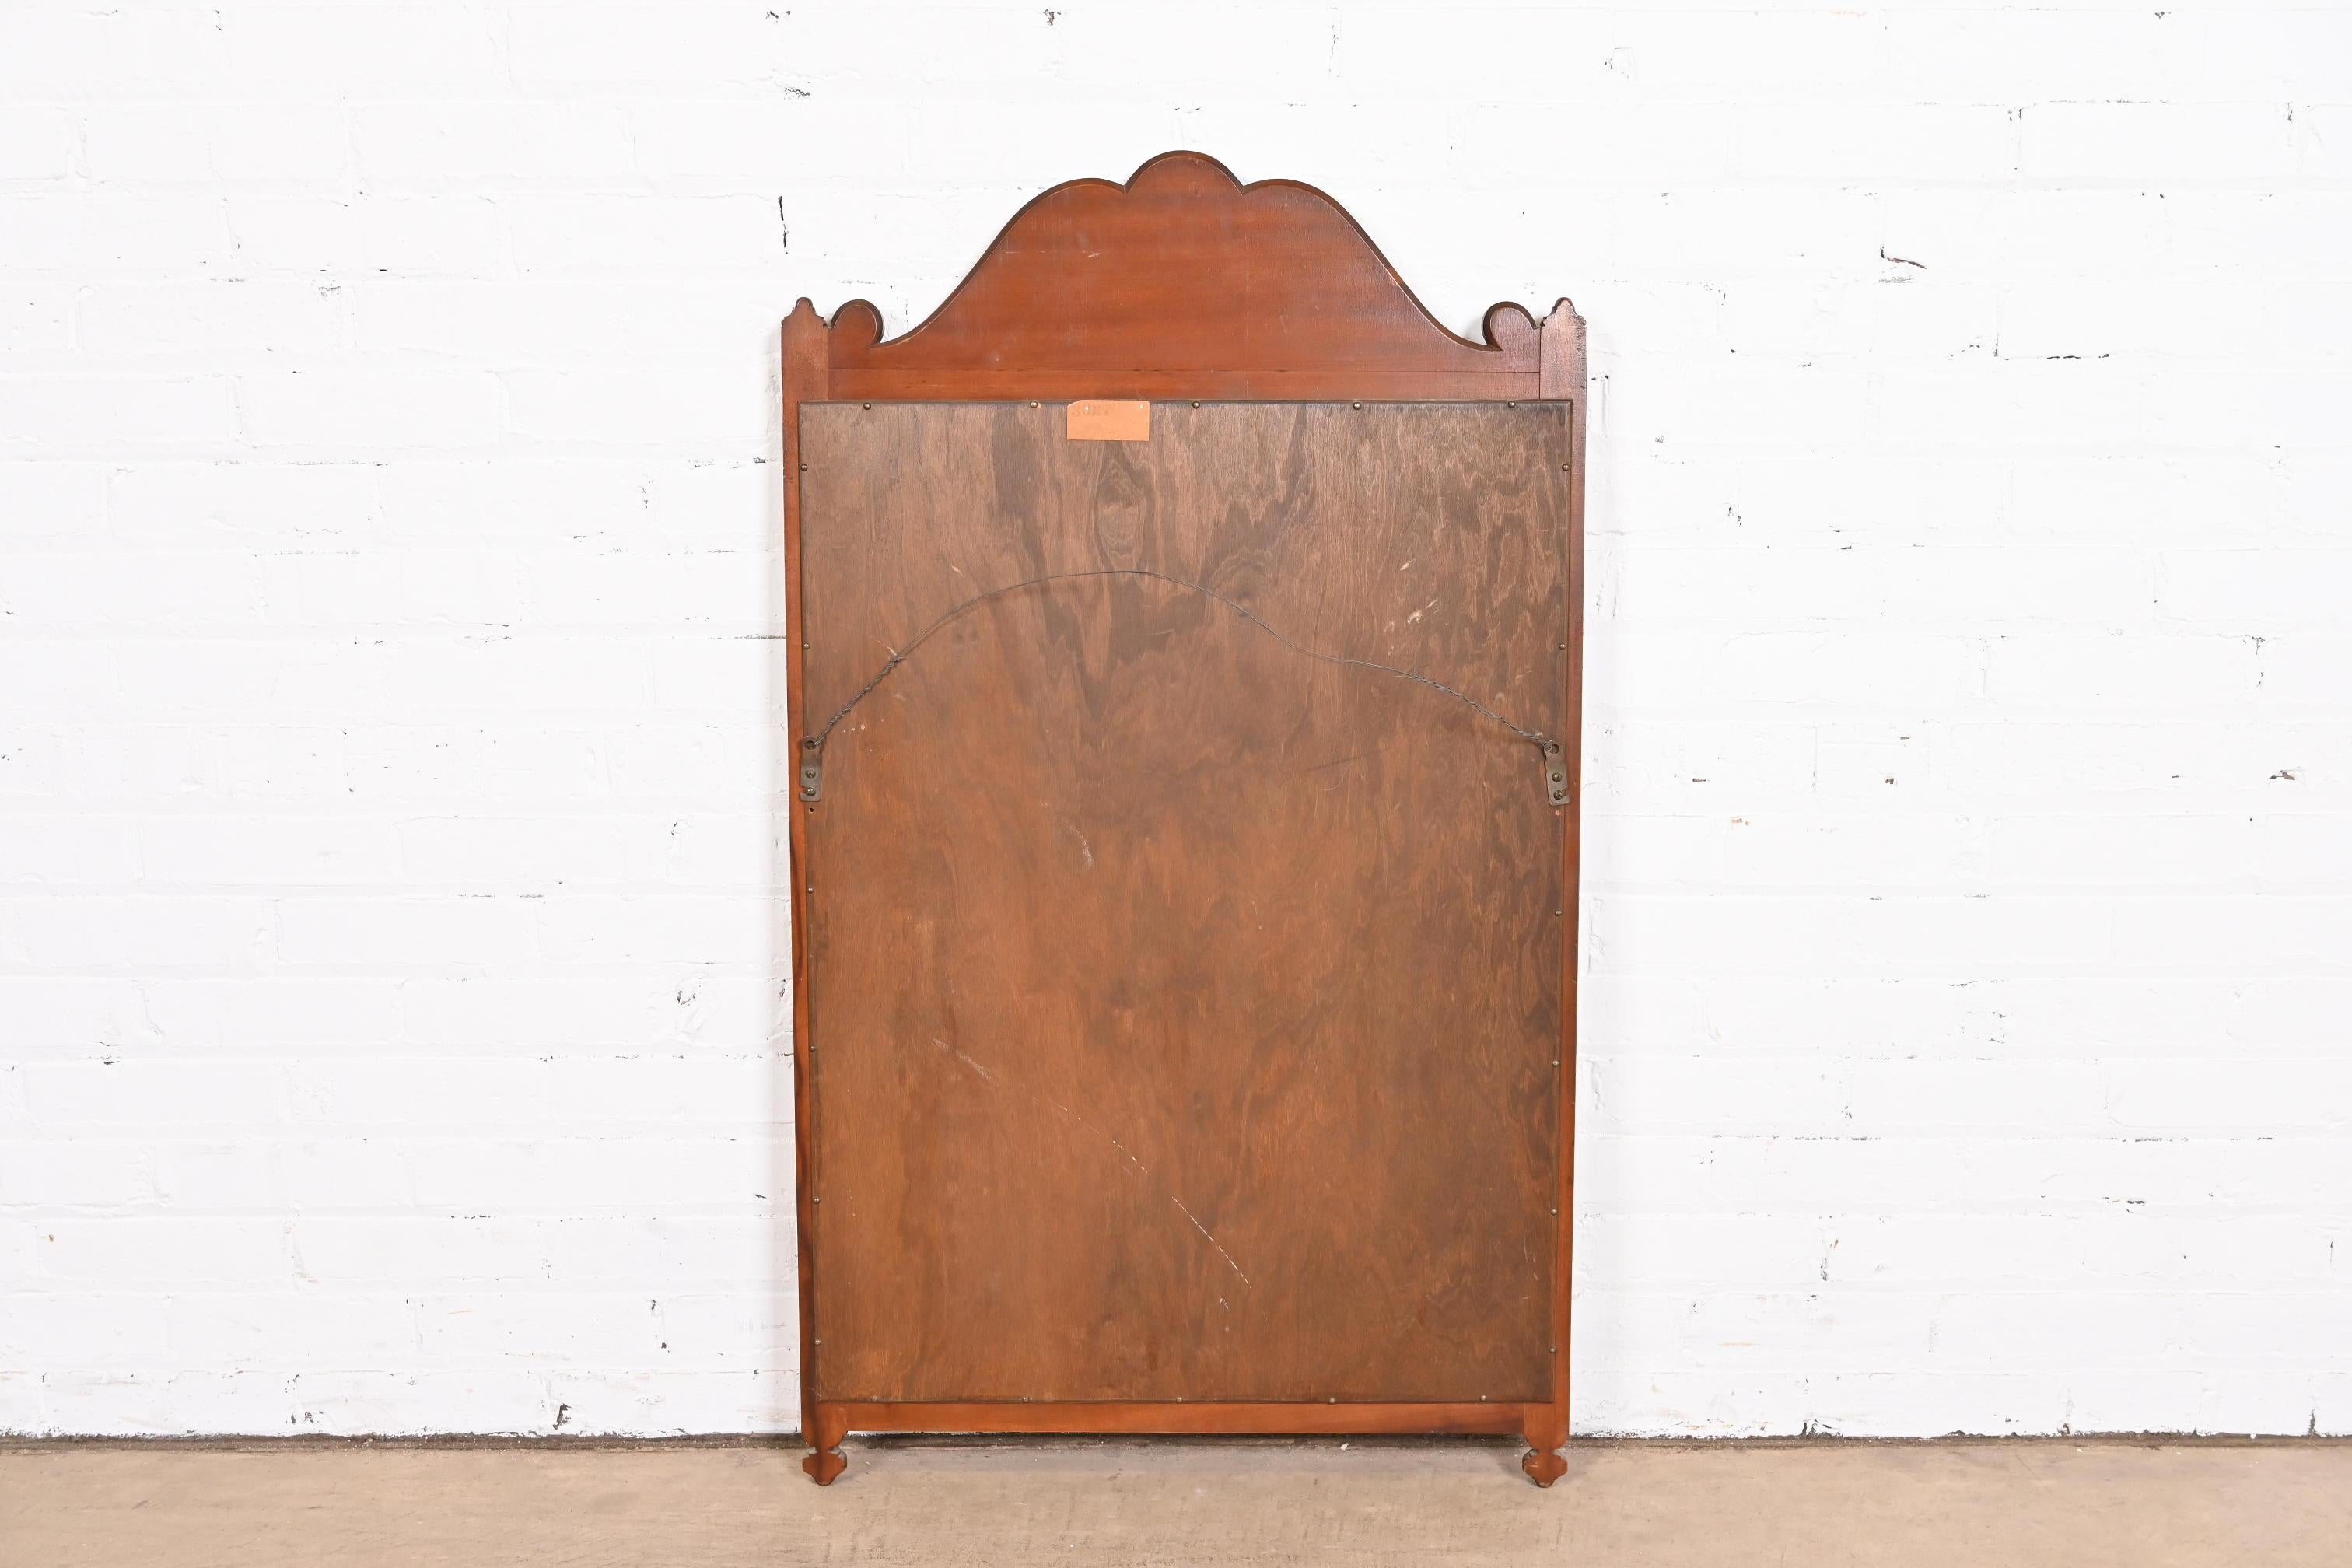 French Art Deco Carved Walnut Wall Mirror by Landstrom, Circa 1940s For Sale 2